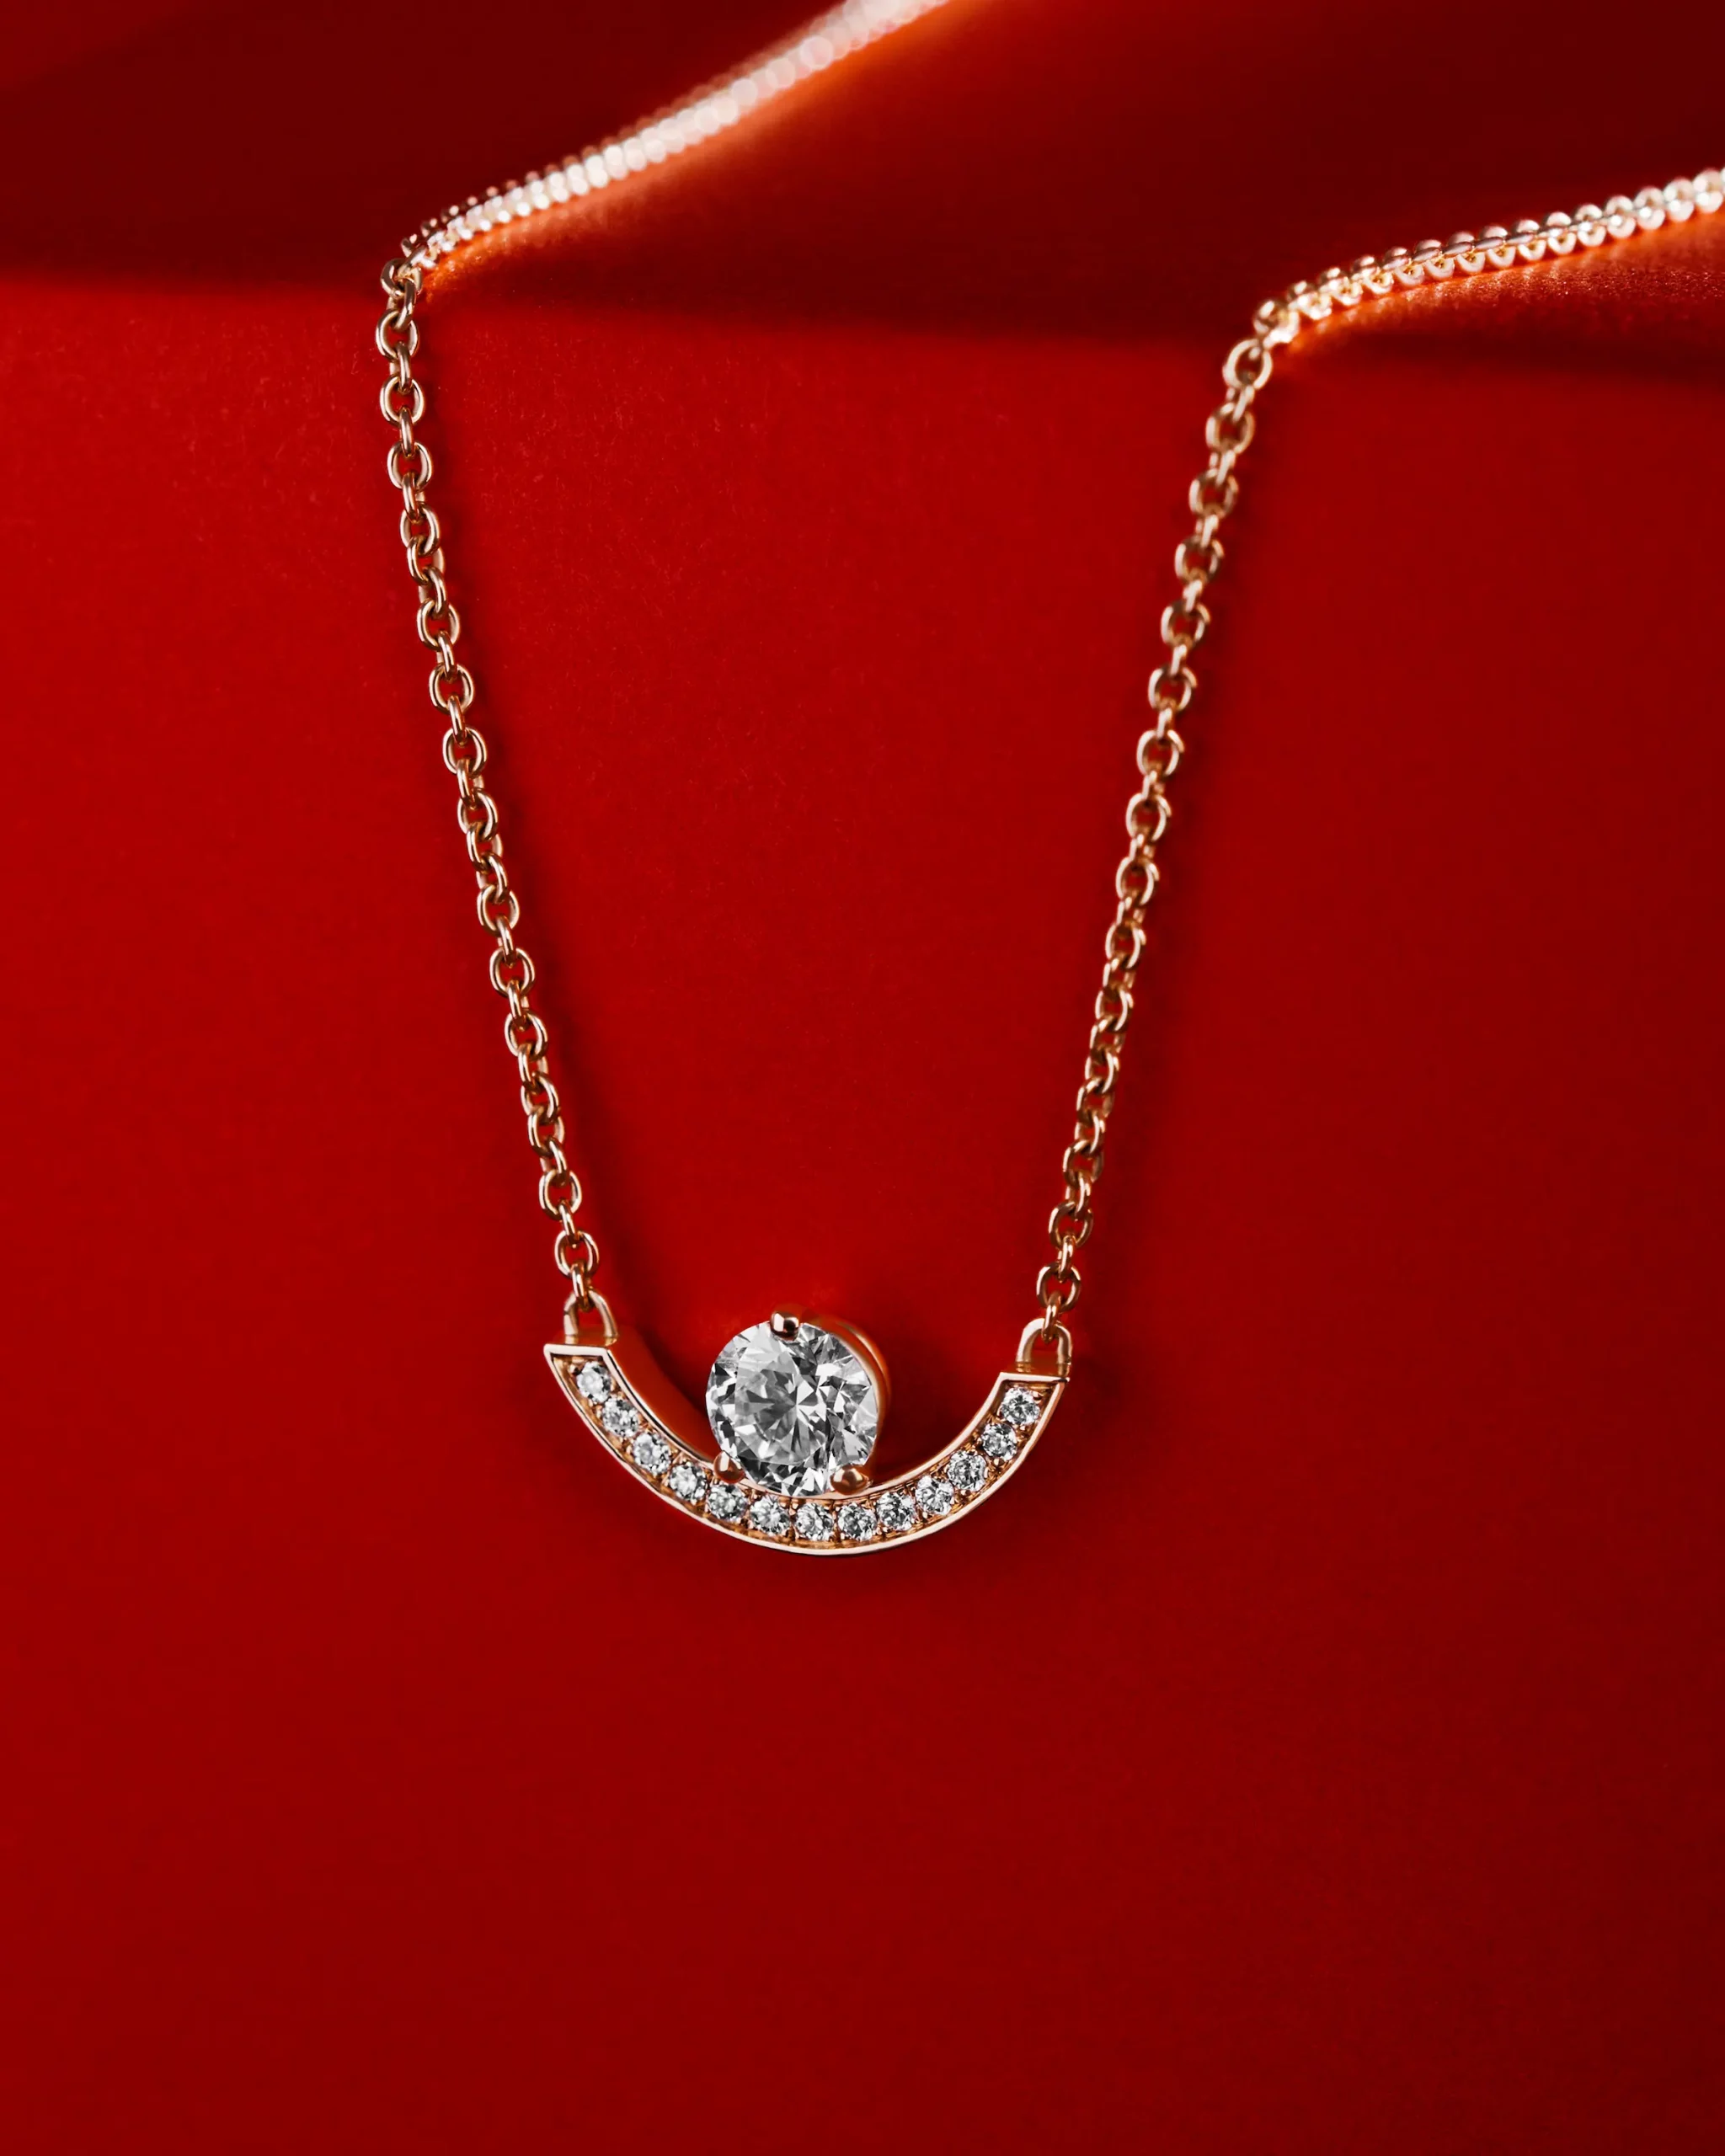 Necklace Intrépide in sustainable recycled gold and lab-grown diamonds